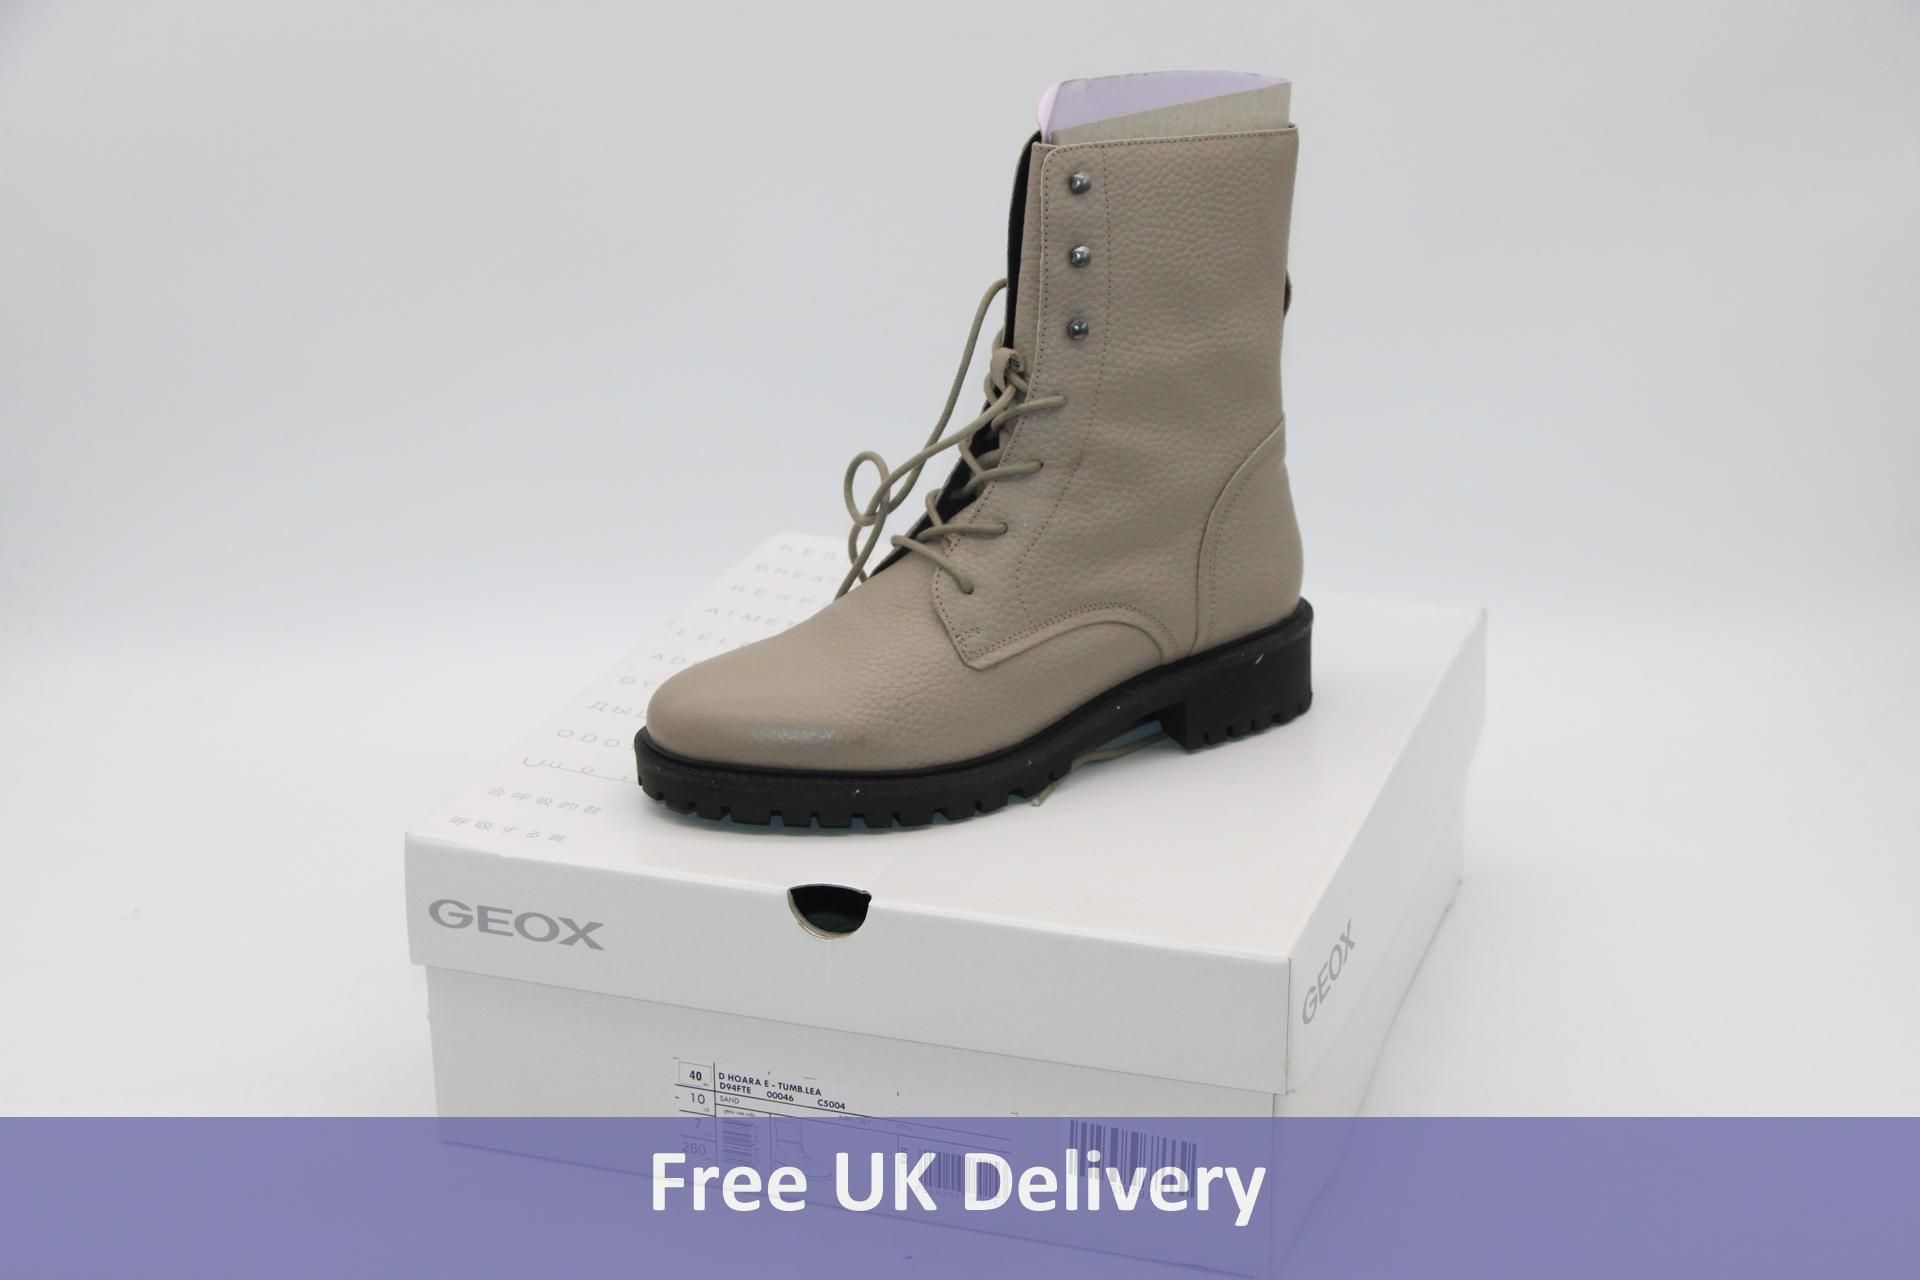 Geox Woma's D Hoara Combat Boots, Sand, UK 7